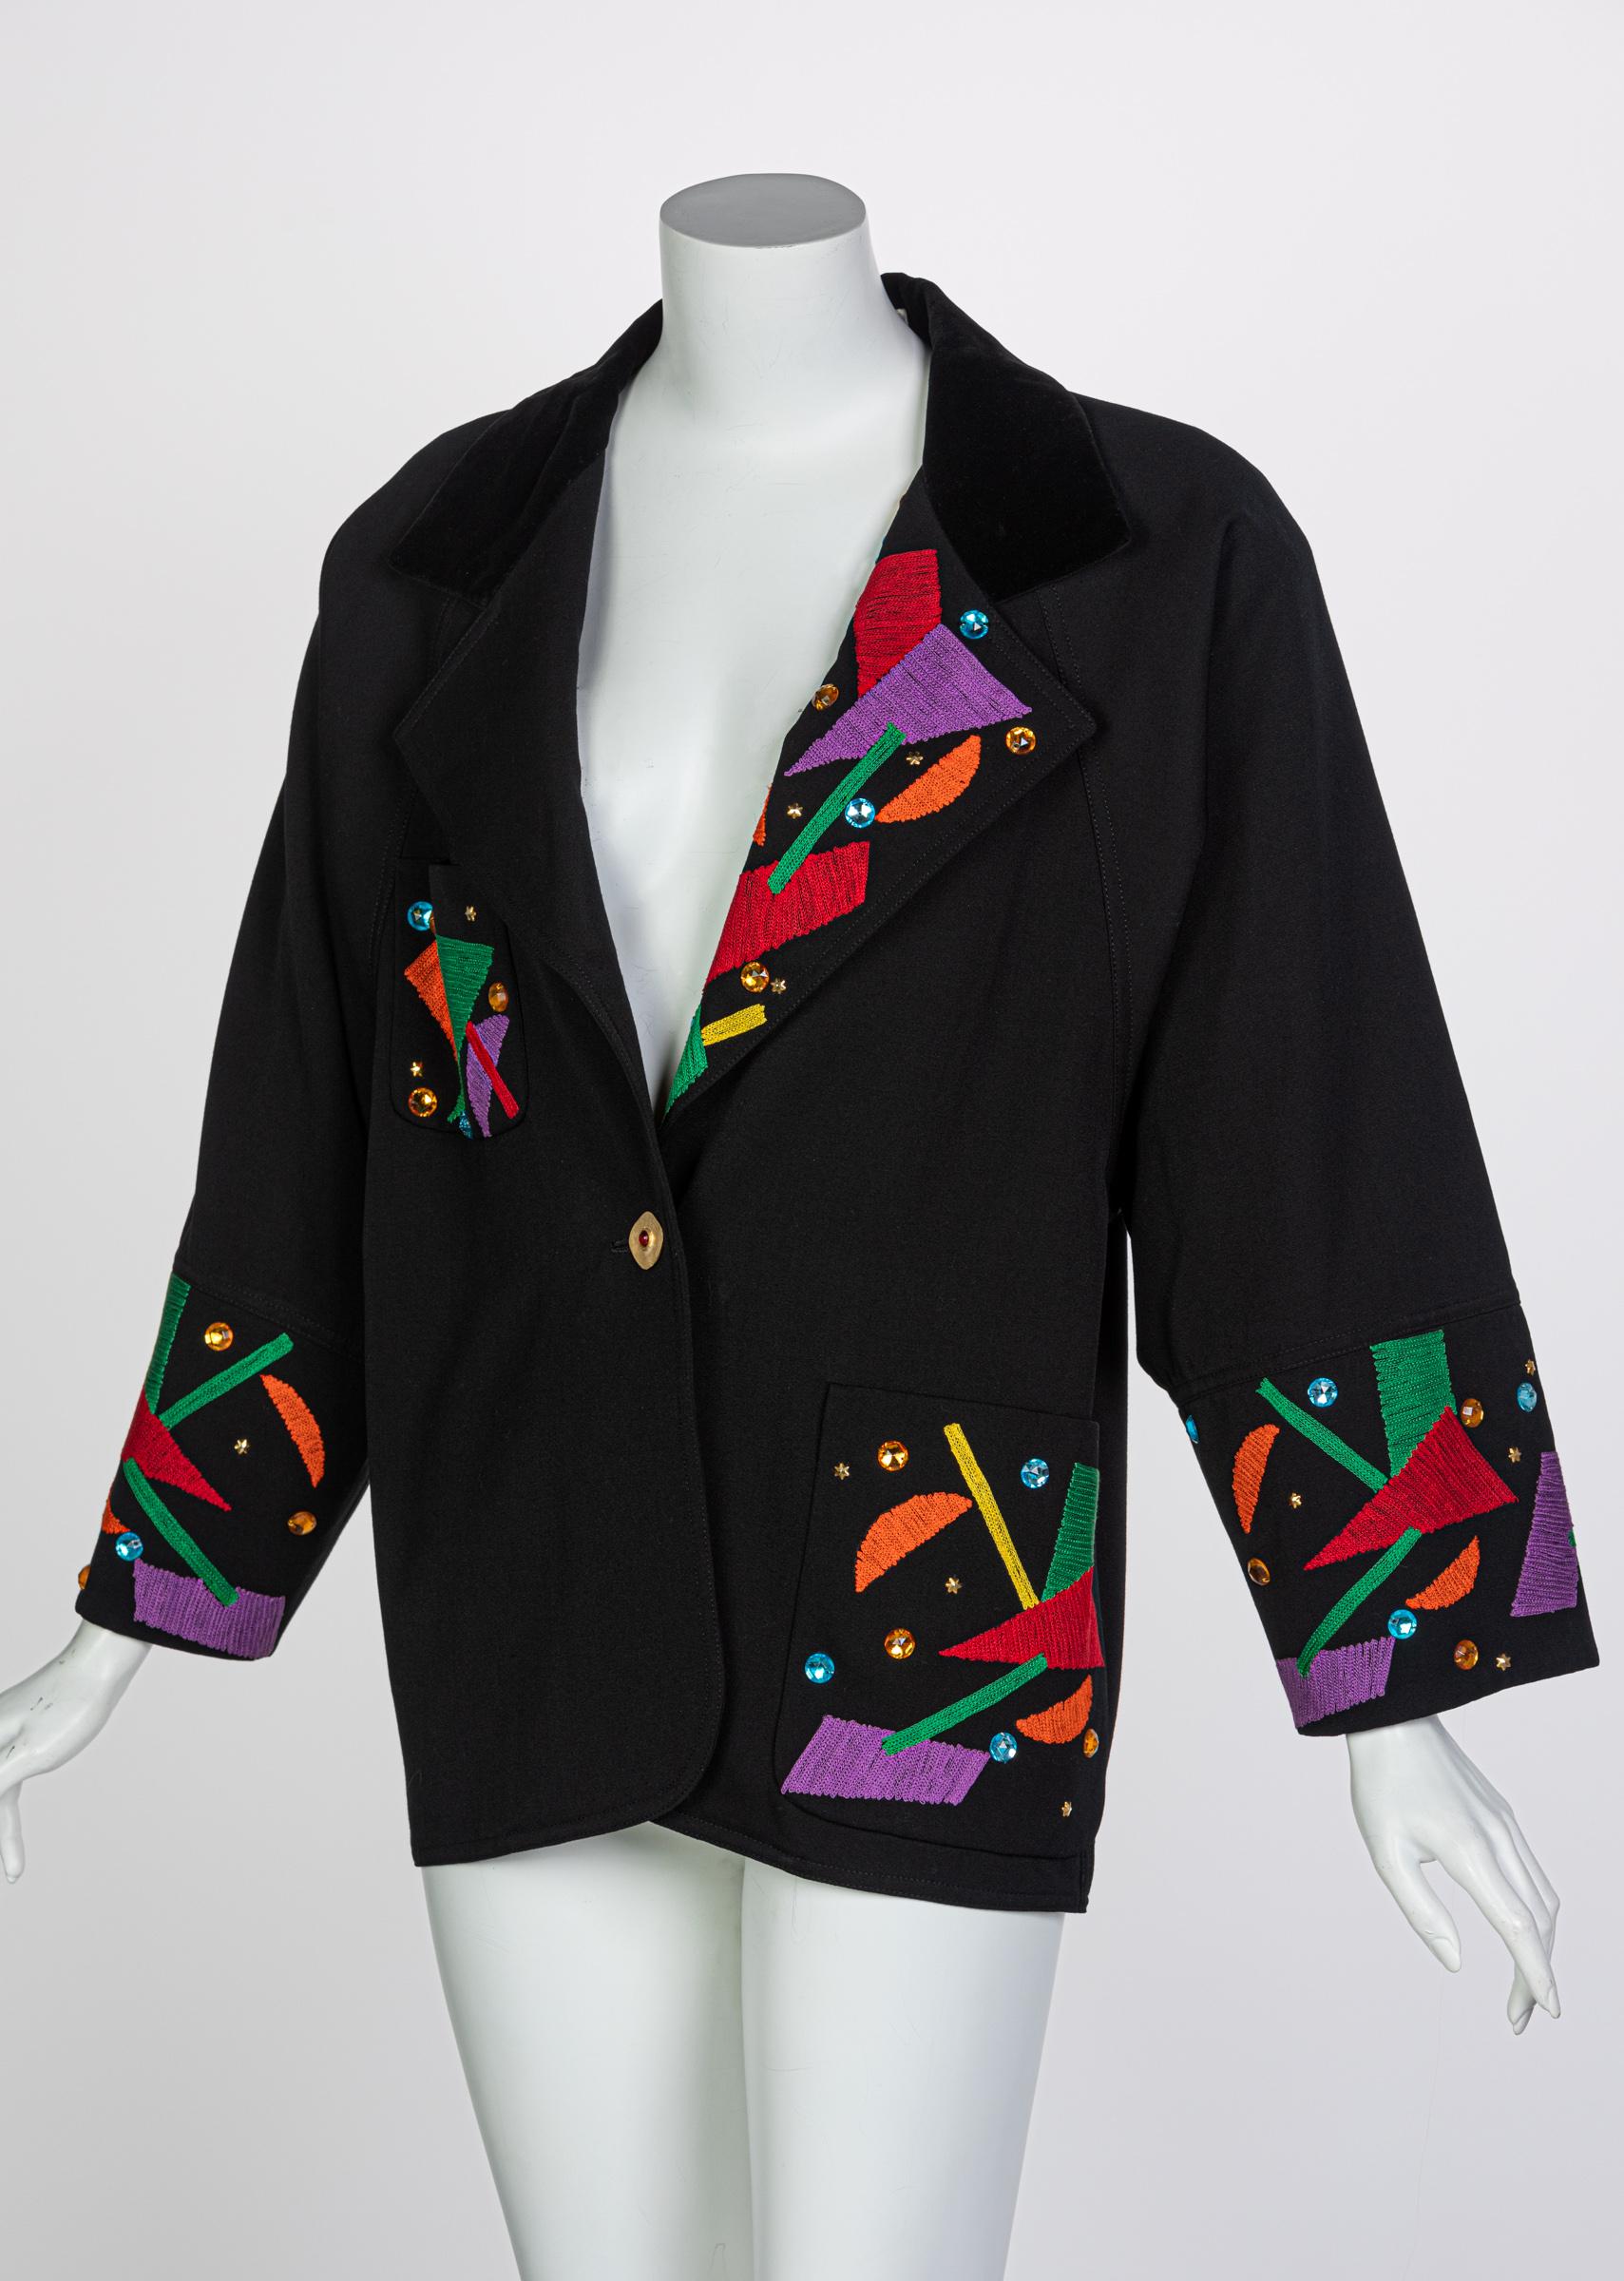 Chloe Karl Lagerfeld Black Colorful Memphis Embroidered Jacket , 1980s In Excellent Condition In Boca Raton, FL